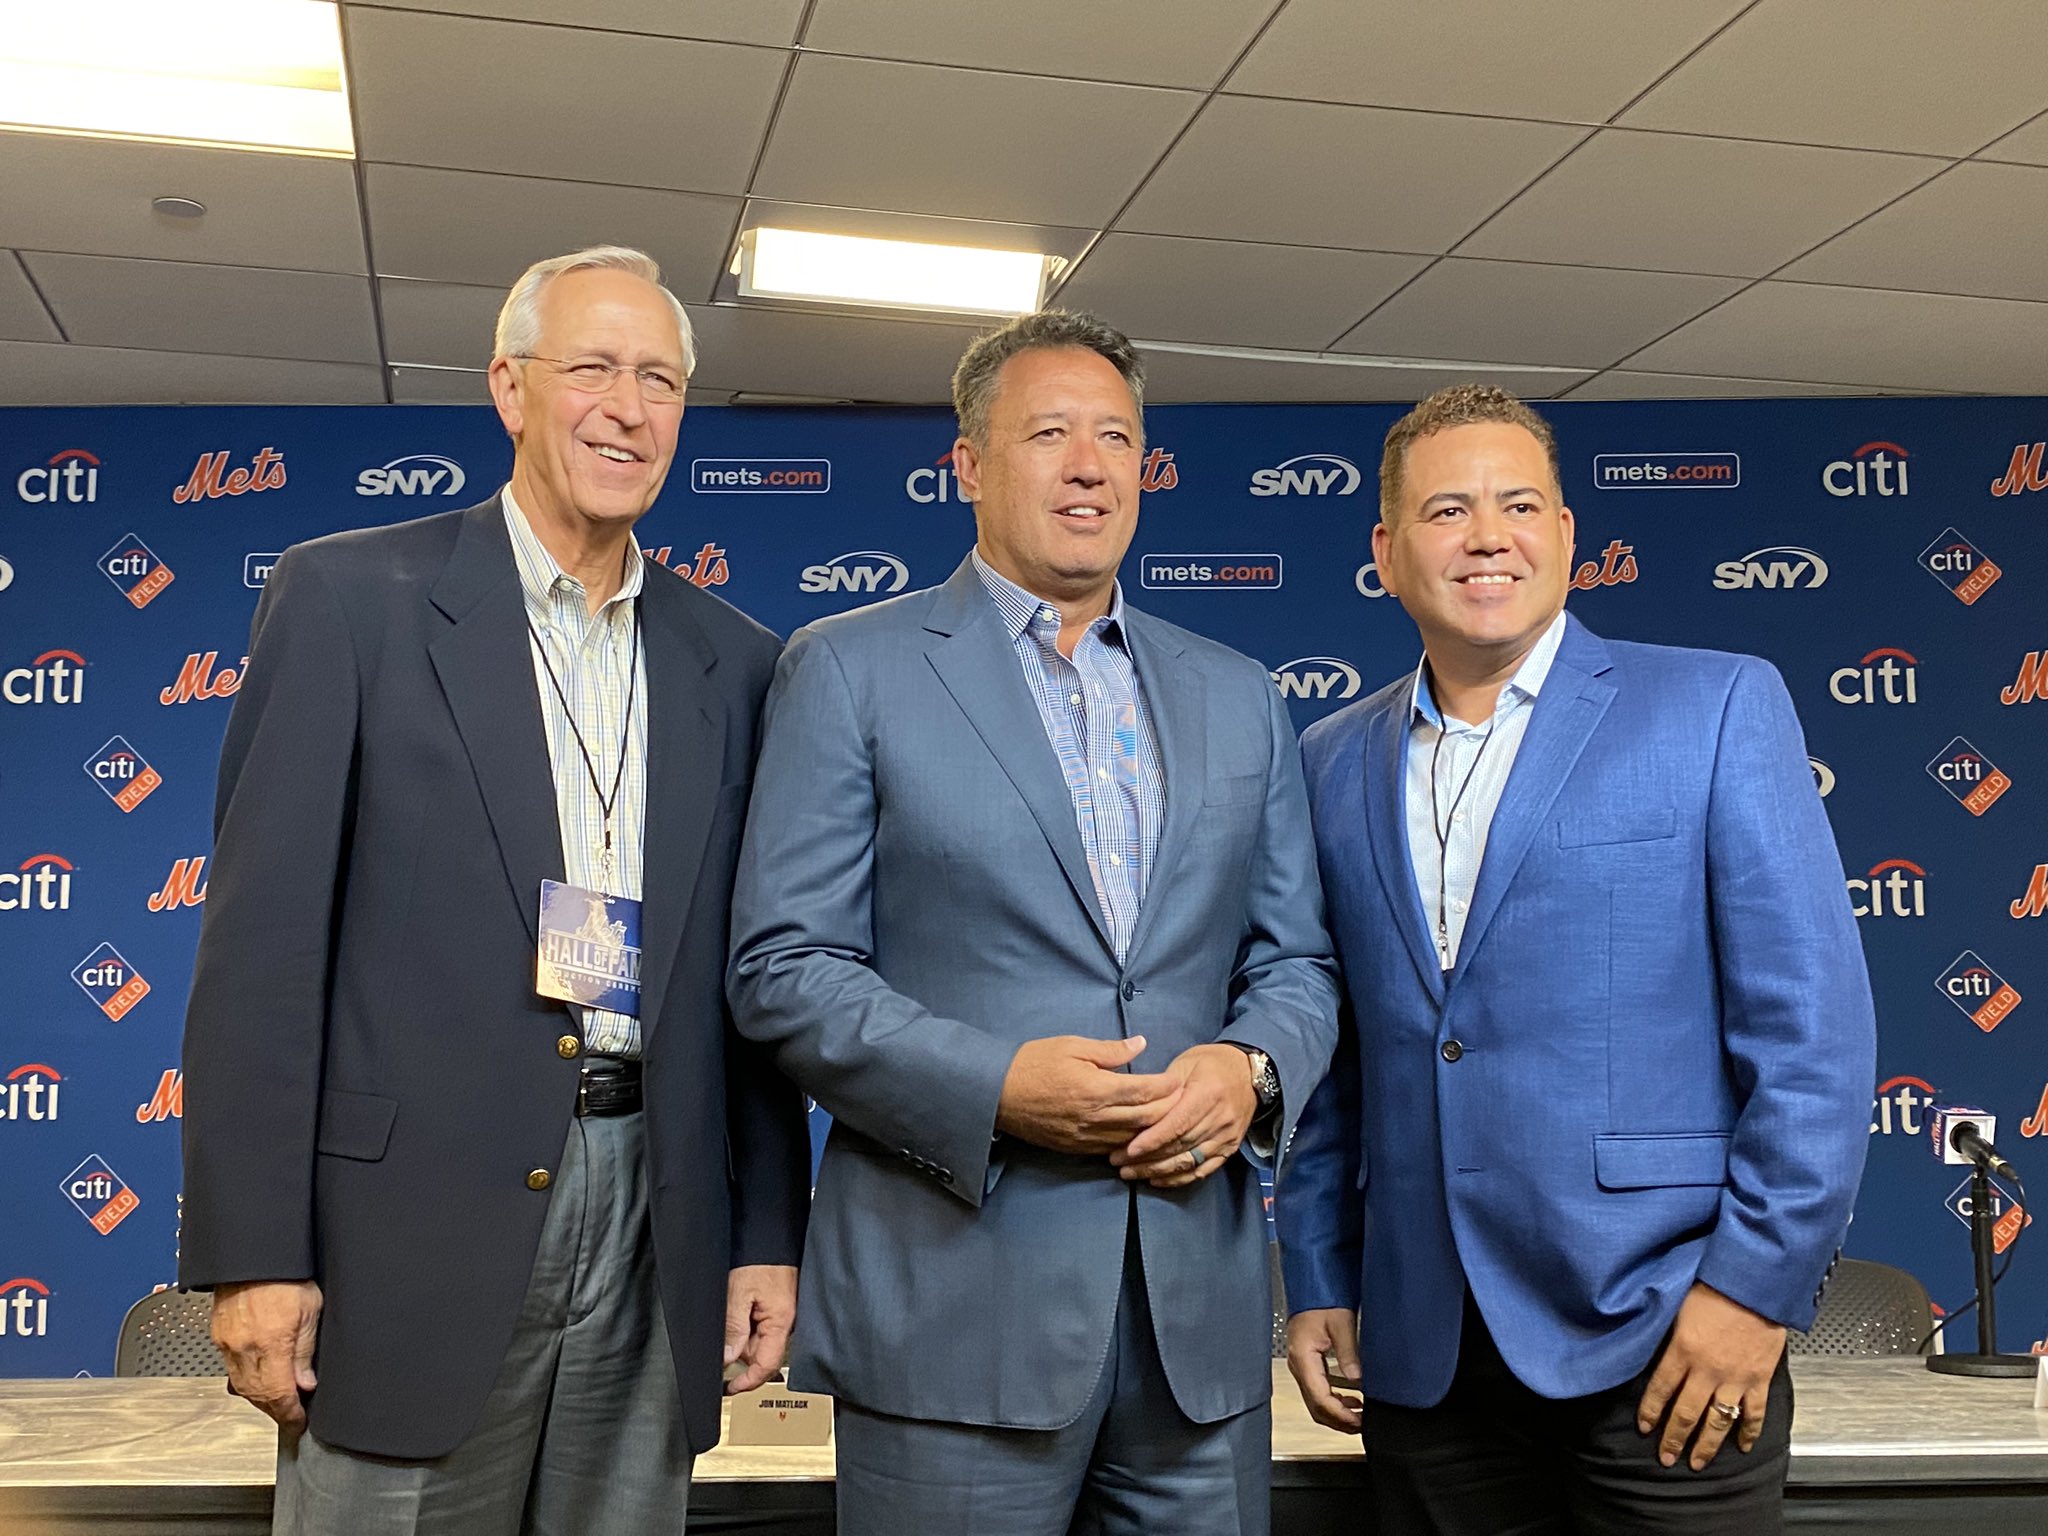 Ron Darling, Edgardo Alfonso & Jon Matlack Inducted To Mets Hall of Fame